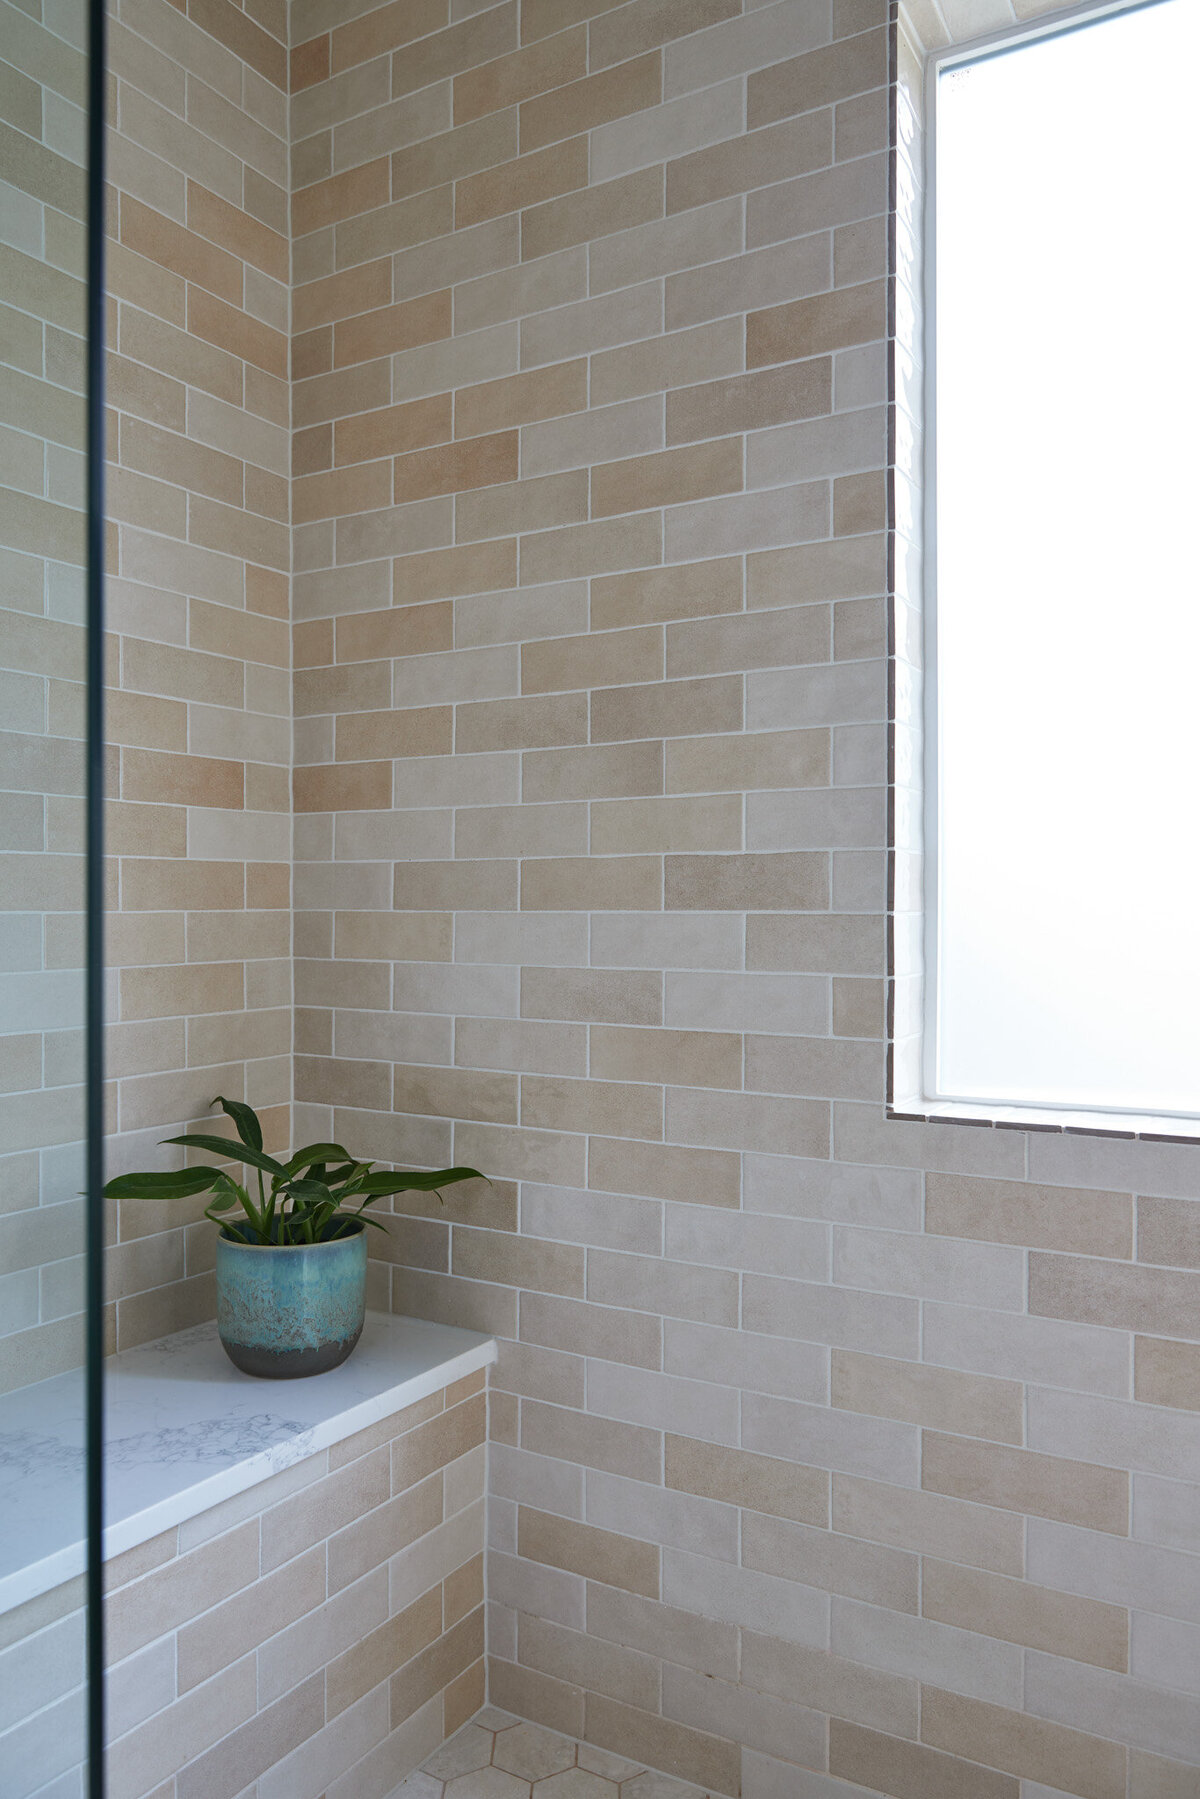 A shower with brick set subway tile that’s beige and salmon in tone. A window in the right hand corner of the shower. A shower bench with a white marble top and a plant sitting on it in a blue vase.